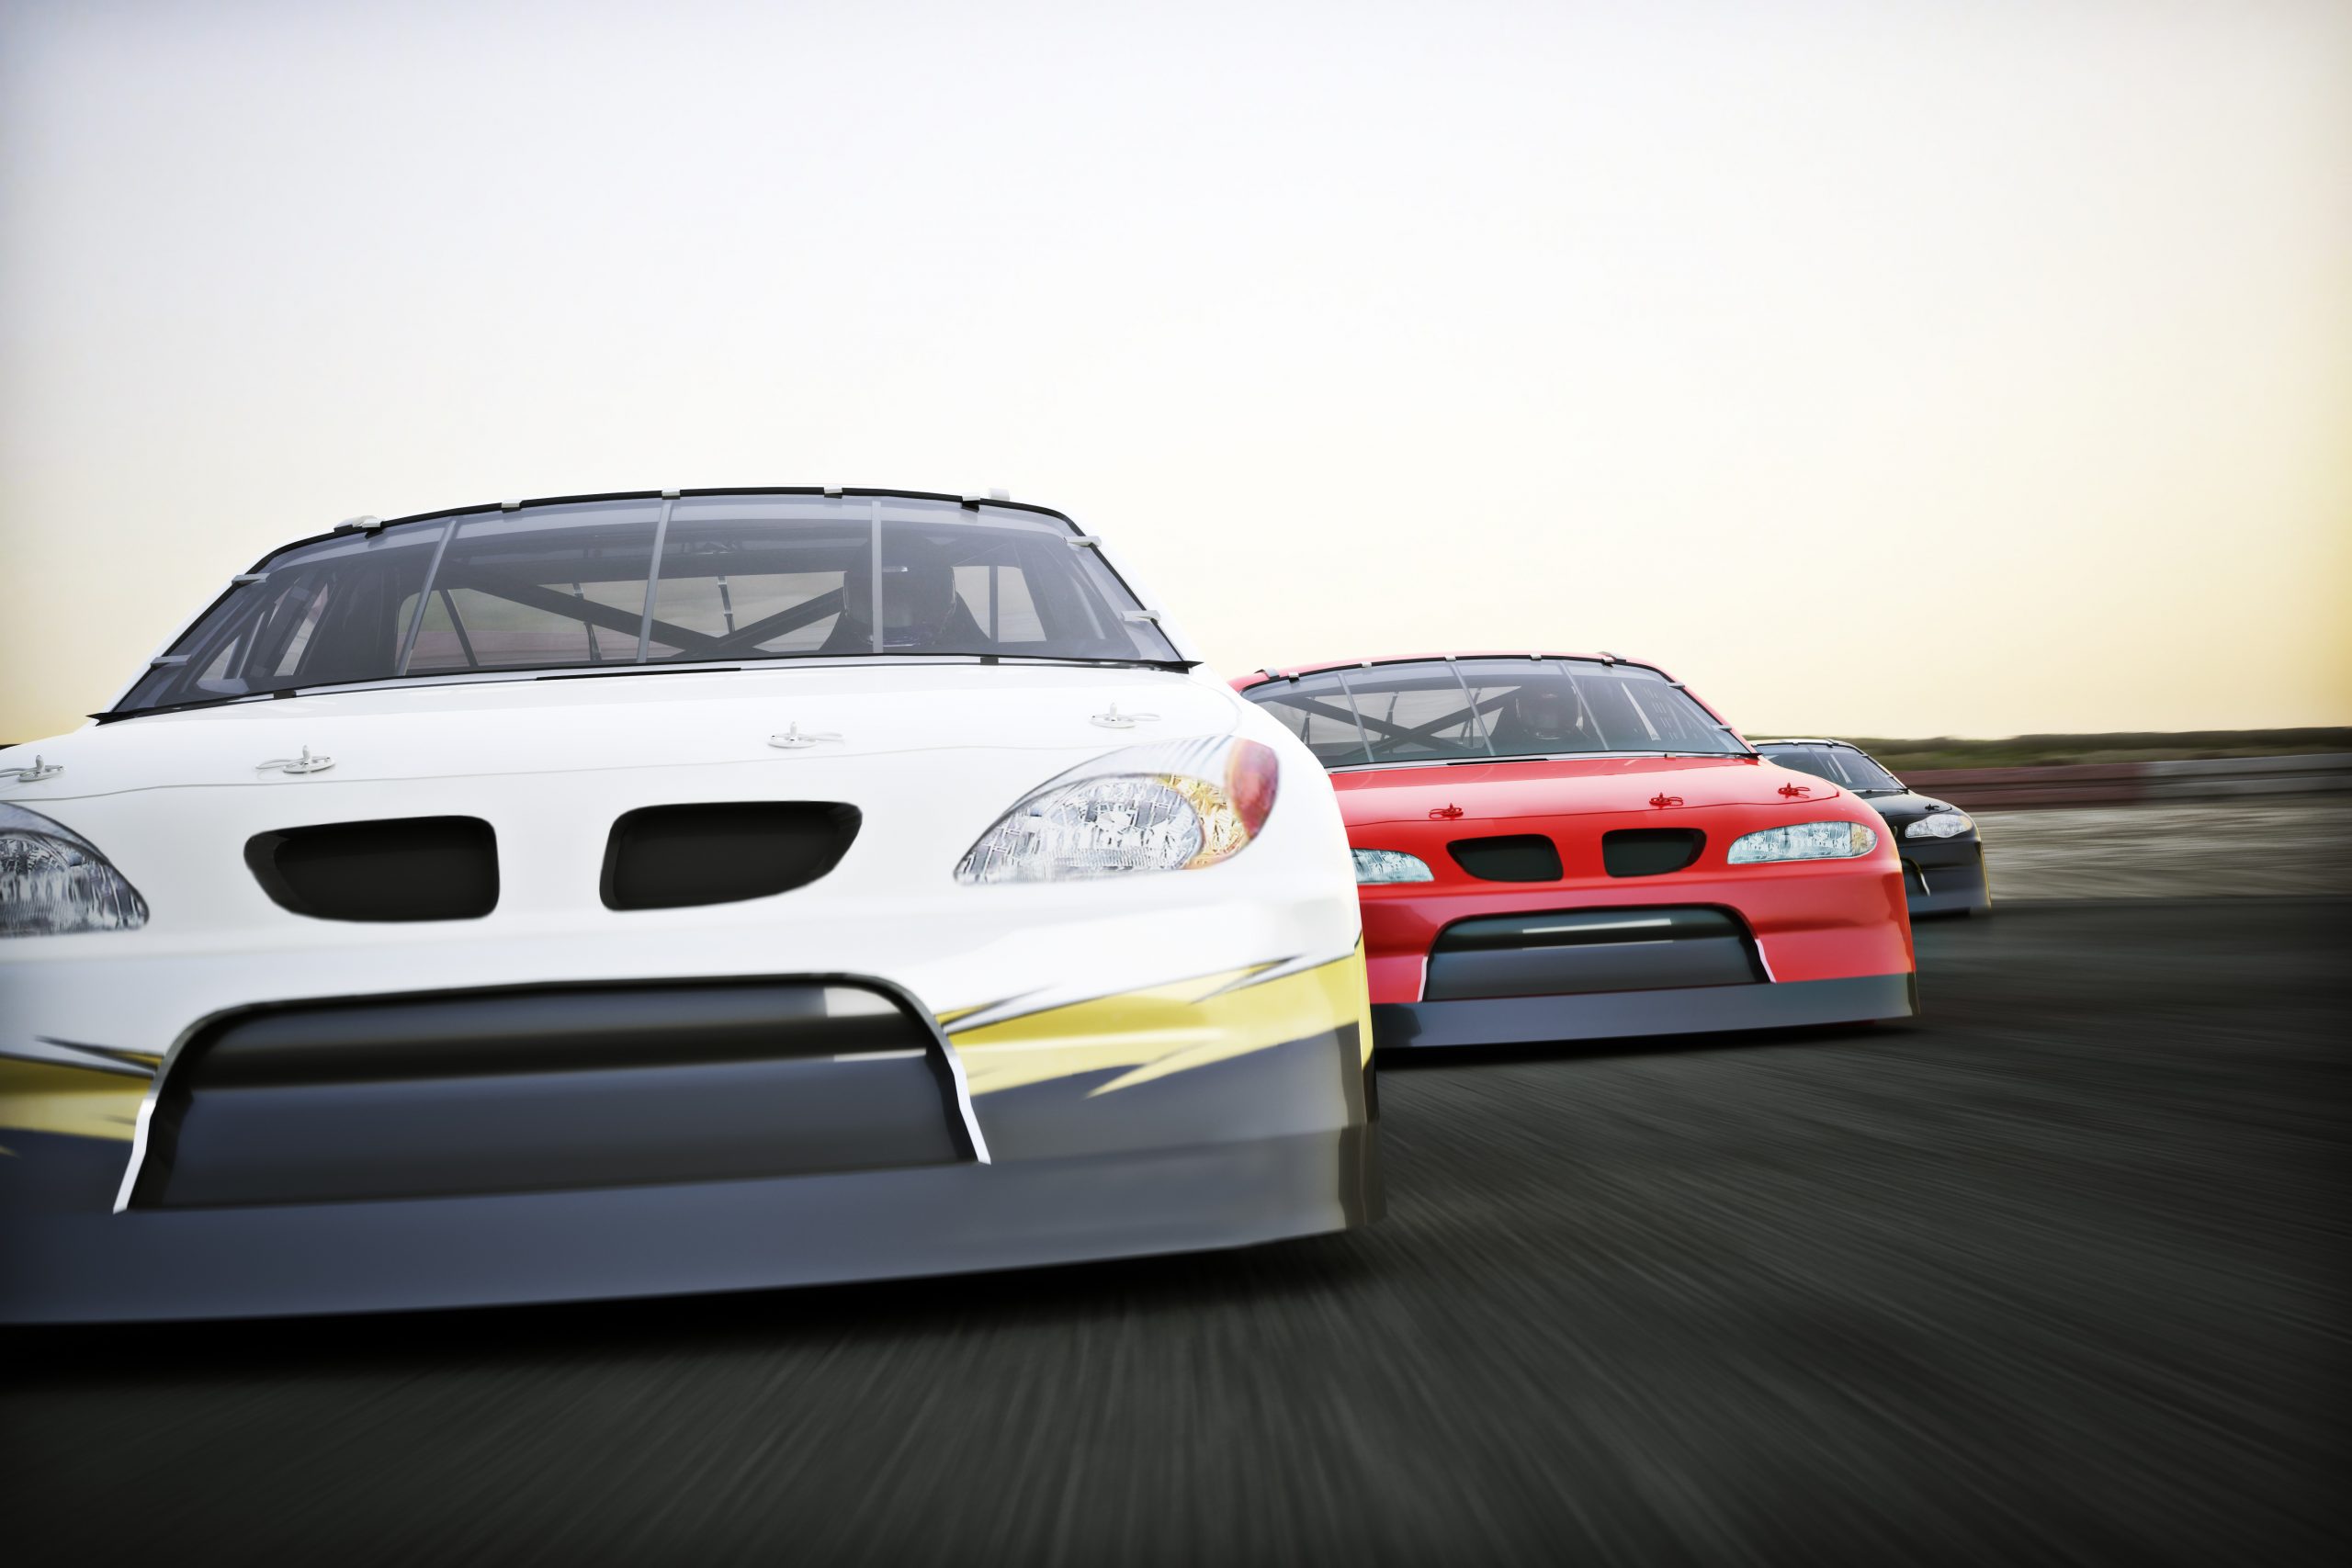 Front view of auto racing race cars racing on a track with motio